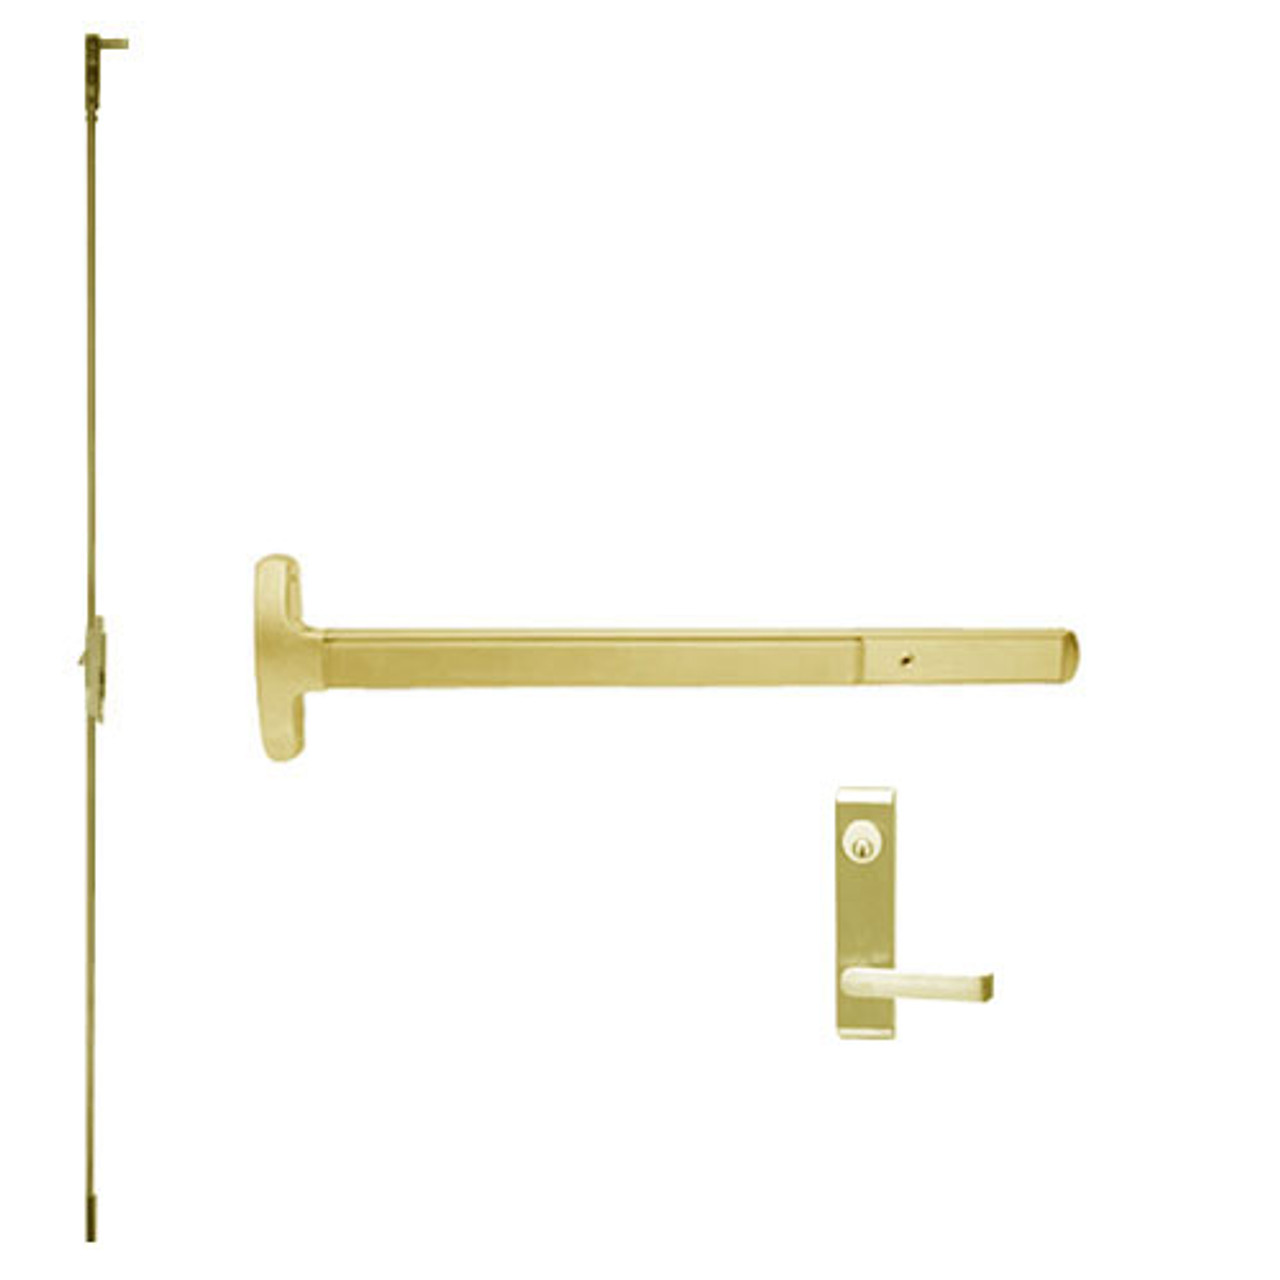 24-C-L-DANE-US3-4-LHR Falcon Exit Device in Polished Brass